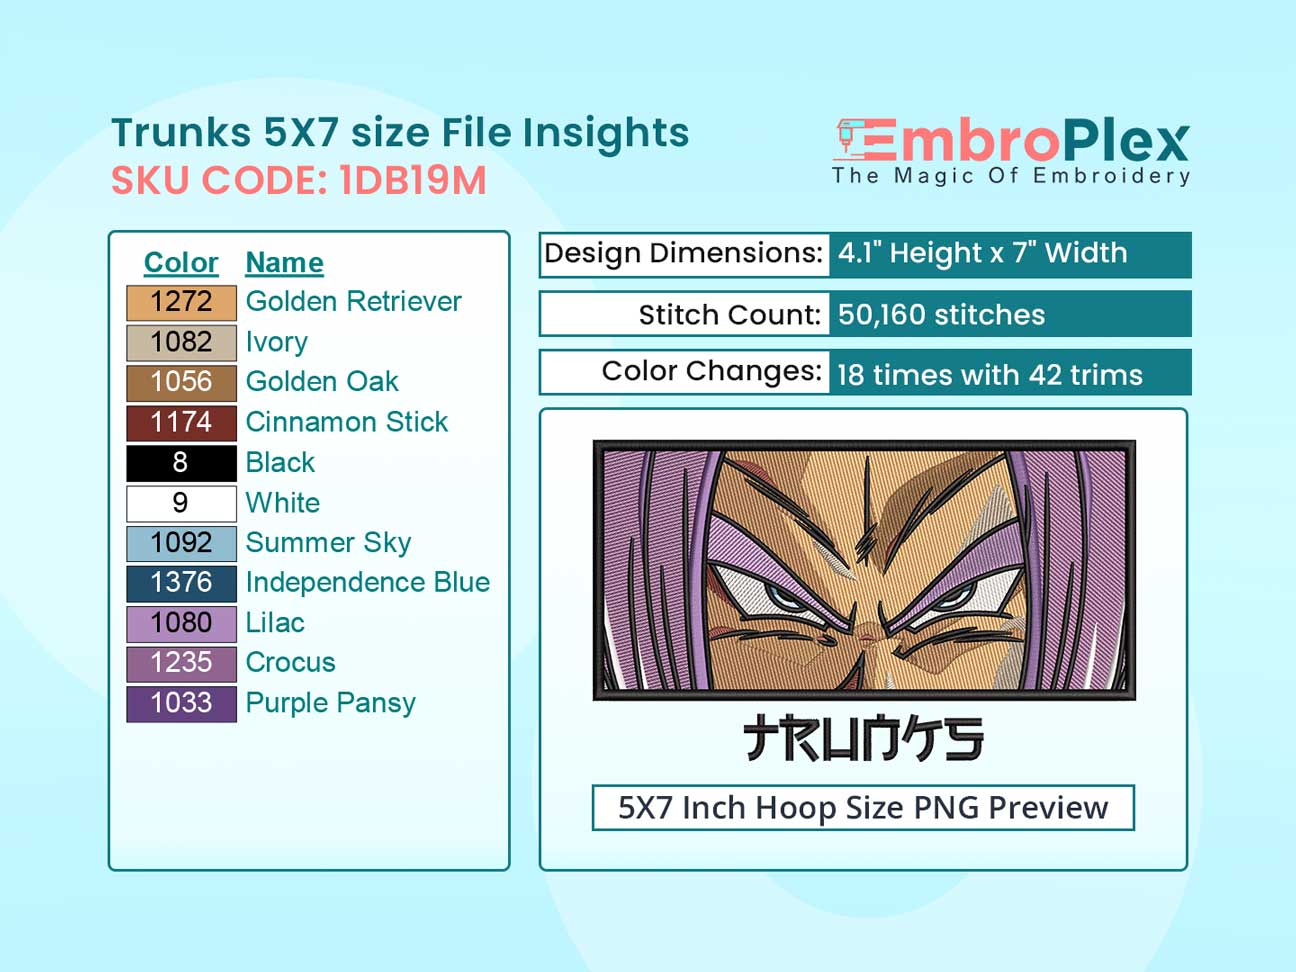 Anime-Inspired Trunks Embroidery Design File - 5x7 Inch hoop Size Variation overview image